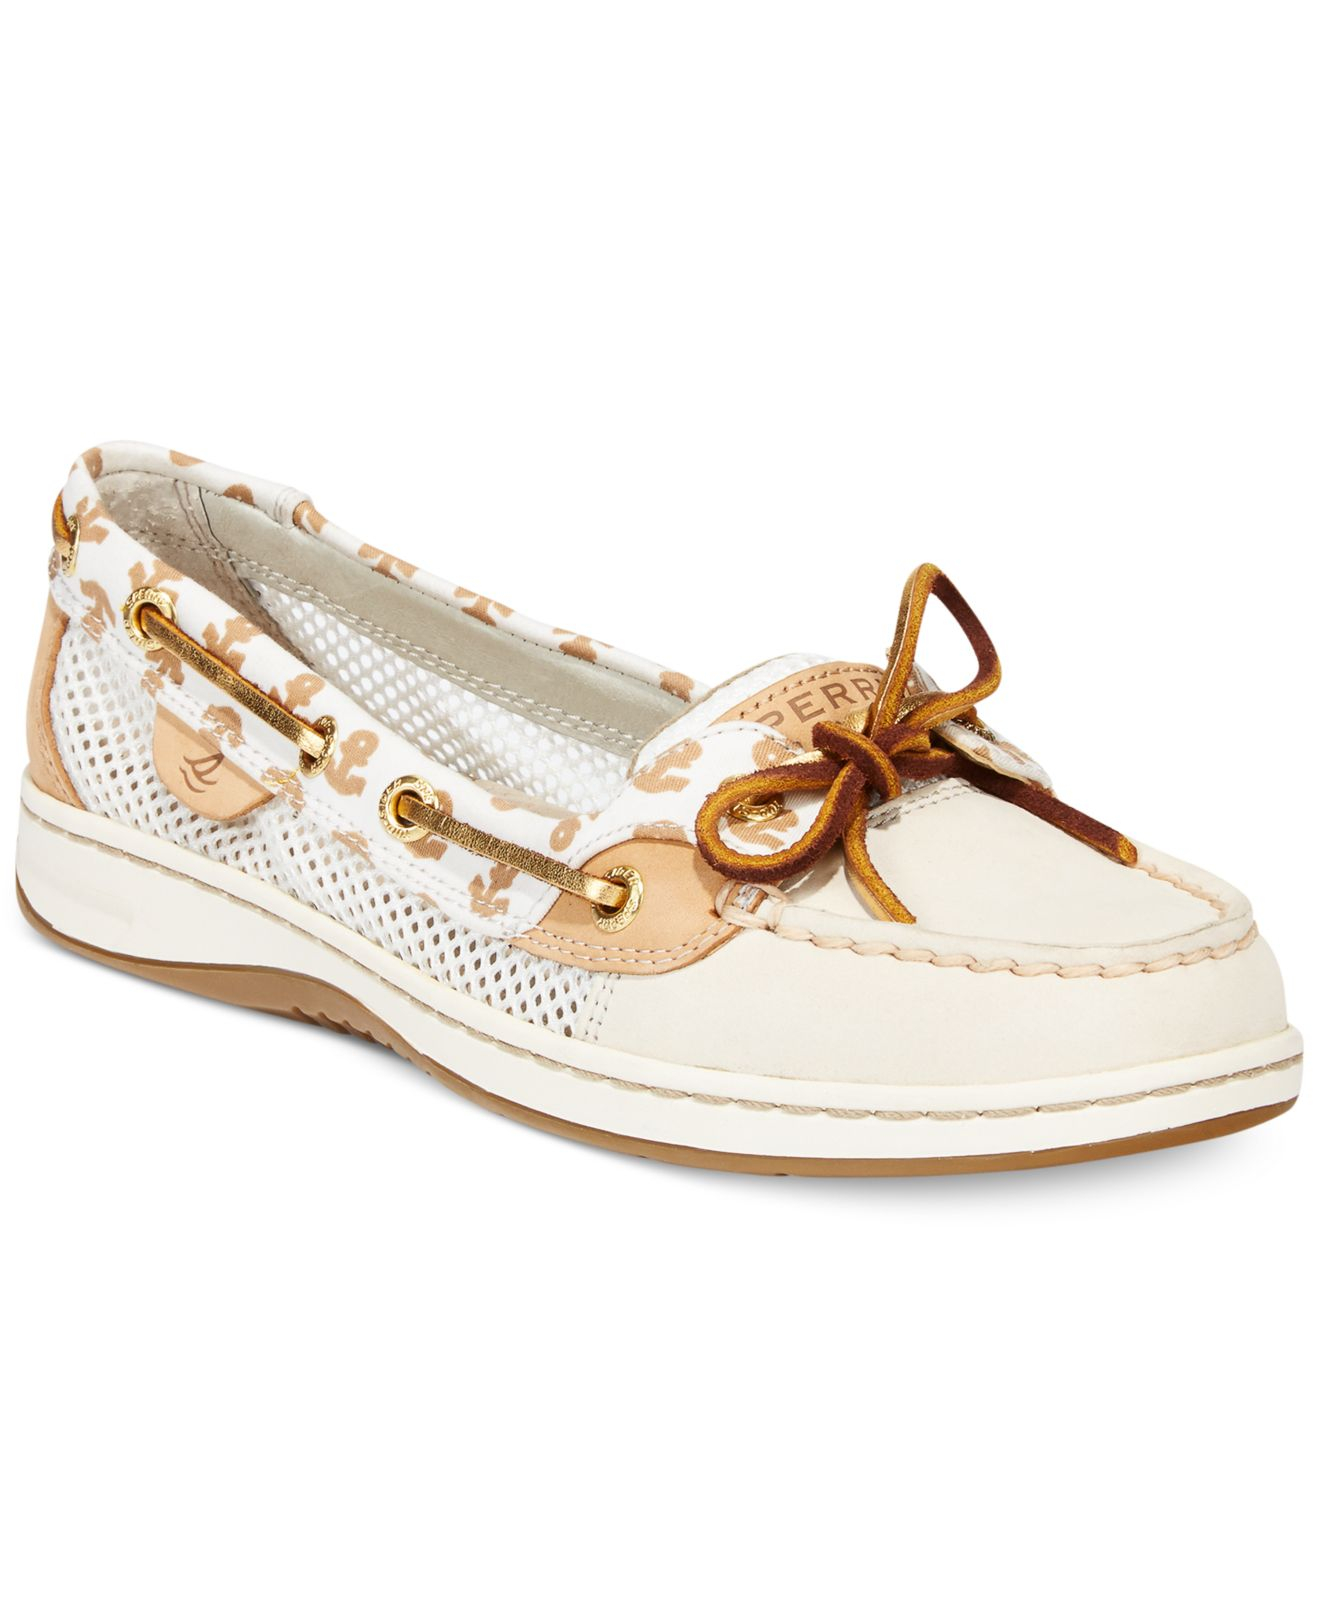 Sperry Angelfish Embossed Anchors Zapatos de tacón para Mujer 